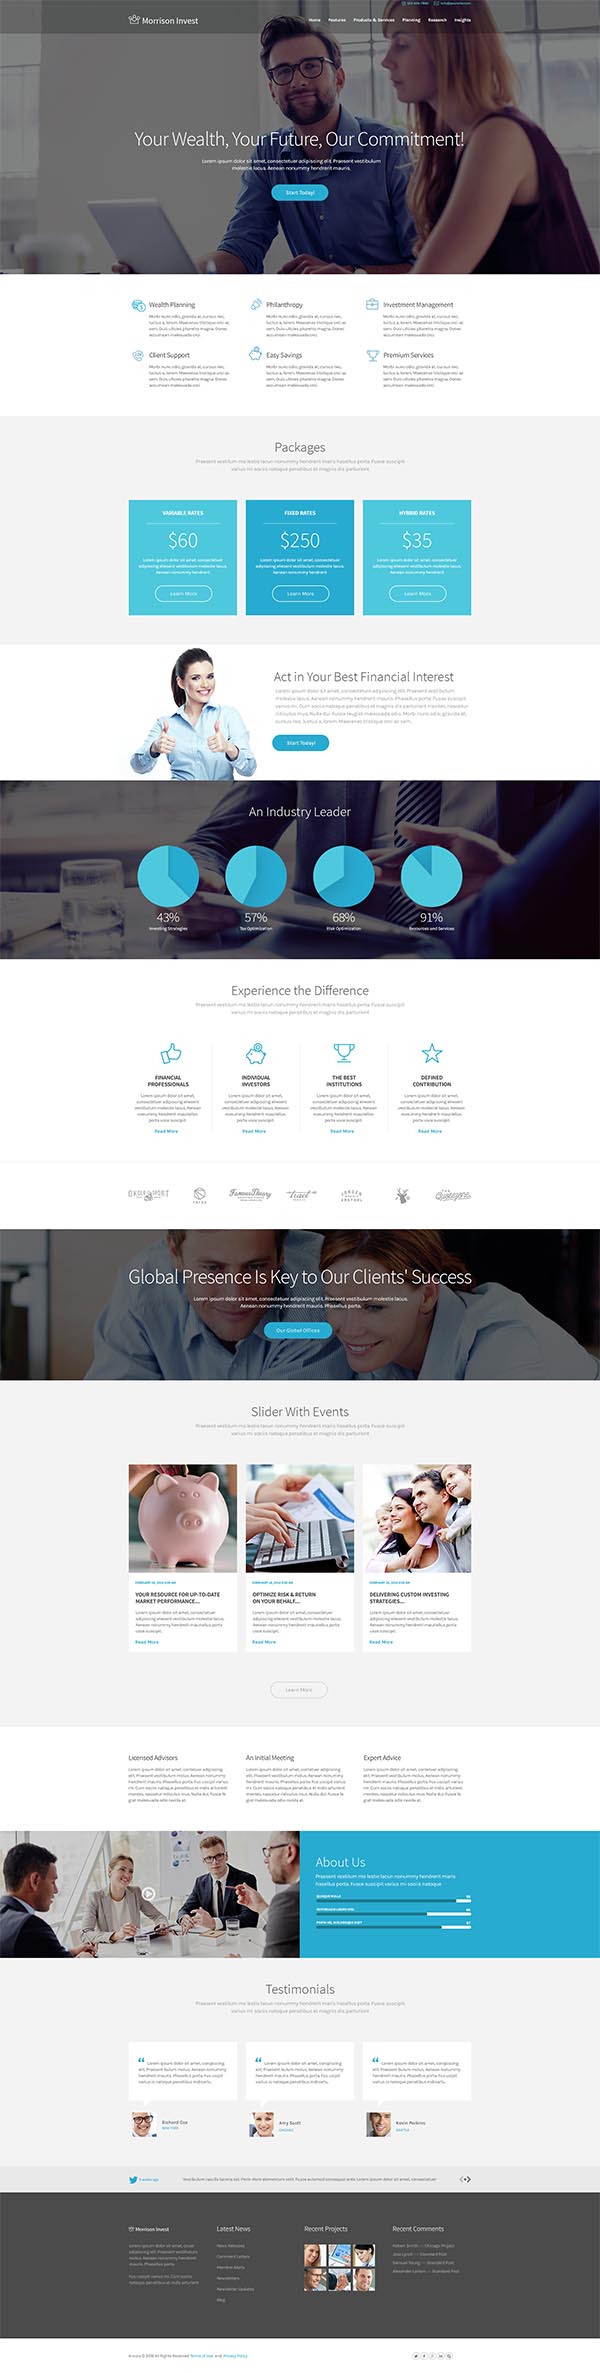 Investments, Business & Financial Advisor WP Theme